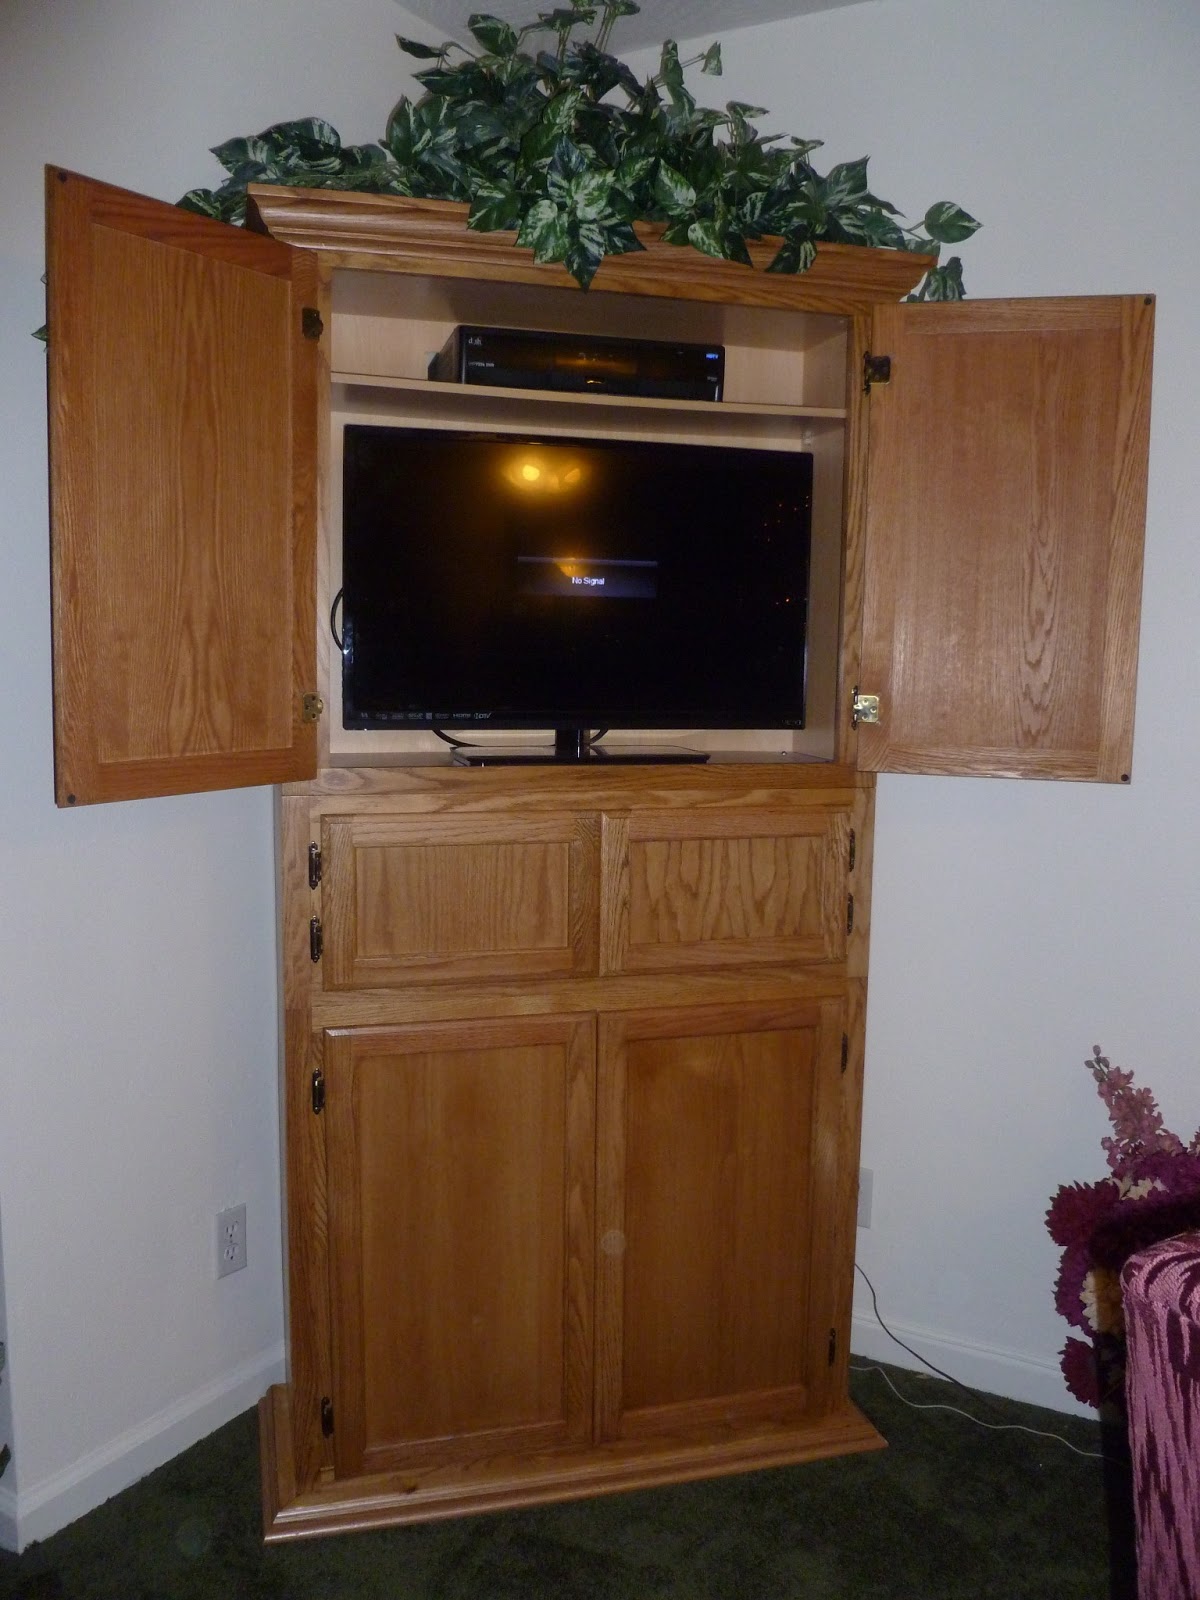 , DIY Entertainment Center, Growing in Grace